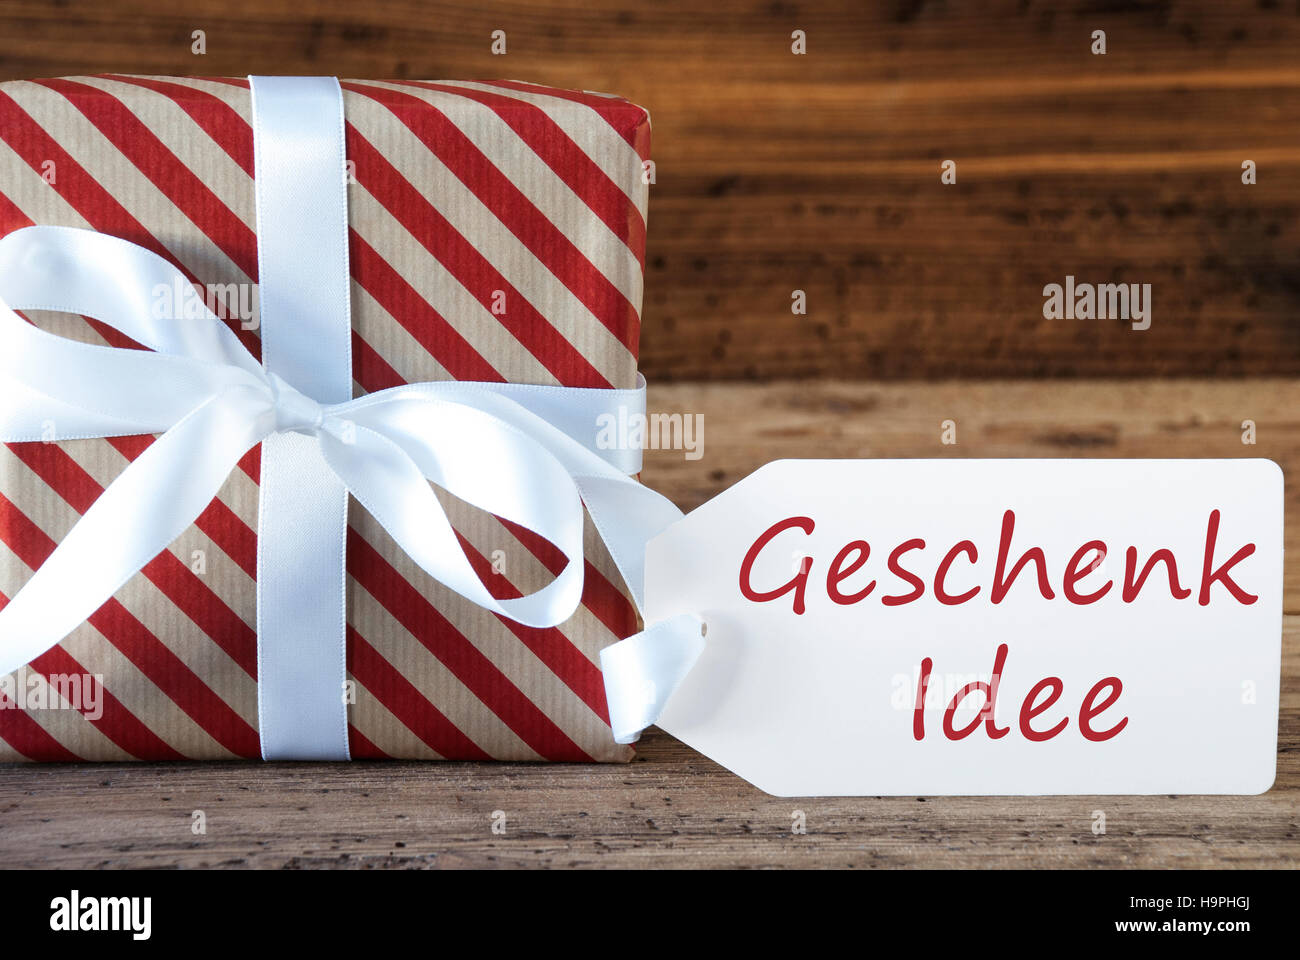 Present With Label, Geschenk Idee Means Gift Idea Stock Photo